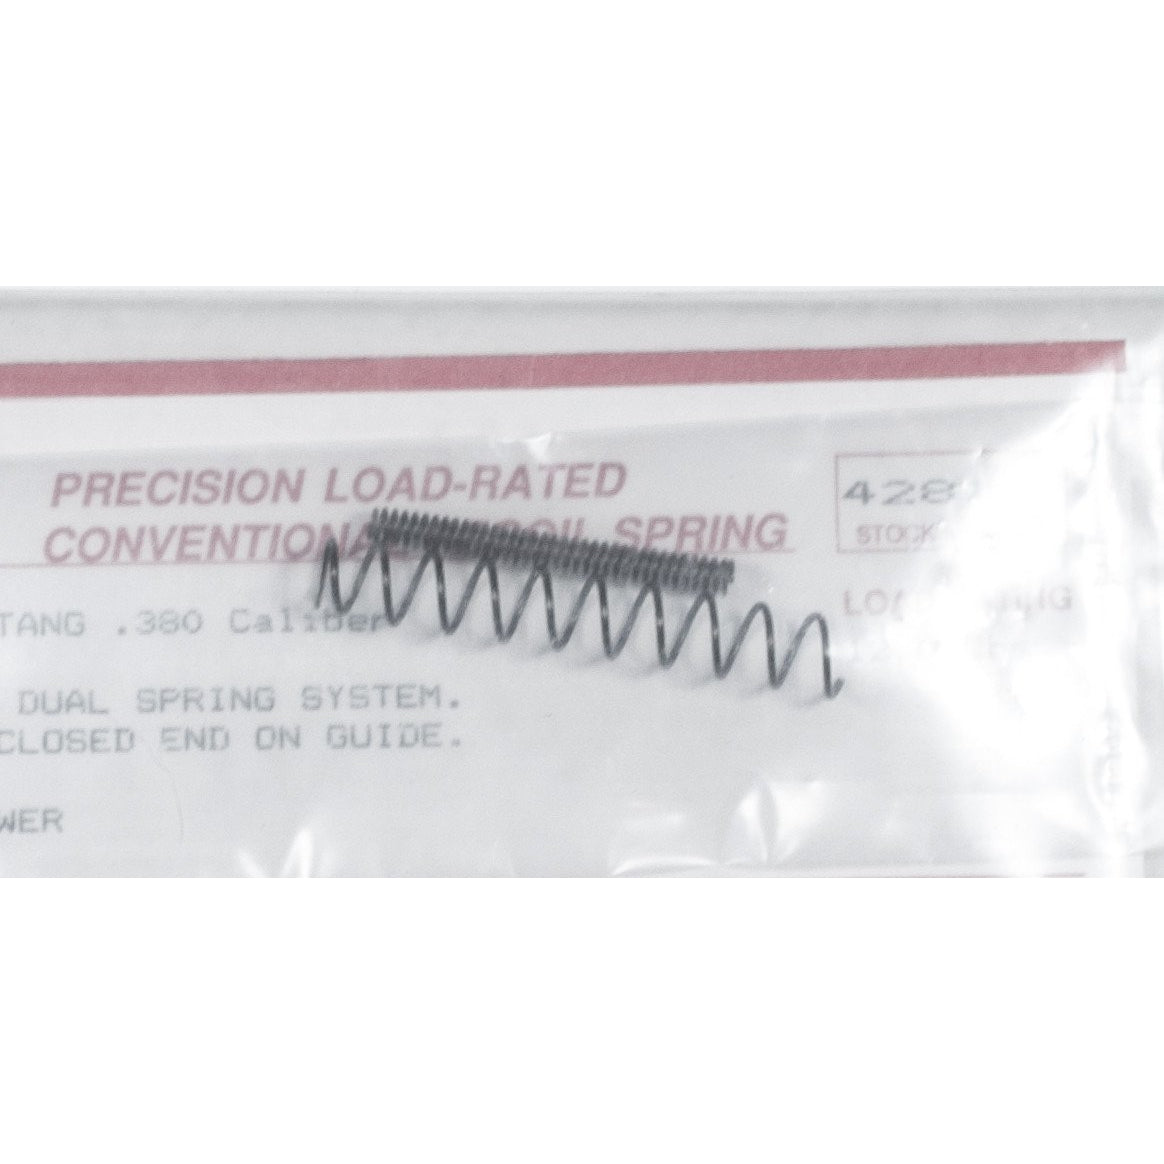 Wolff Precision Load Rated Conventional Recoil Spring for Colt Mustang 380 Cal.